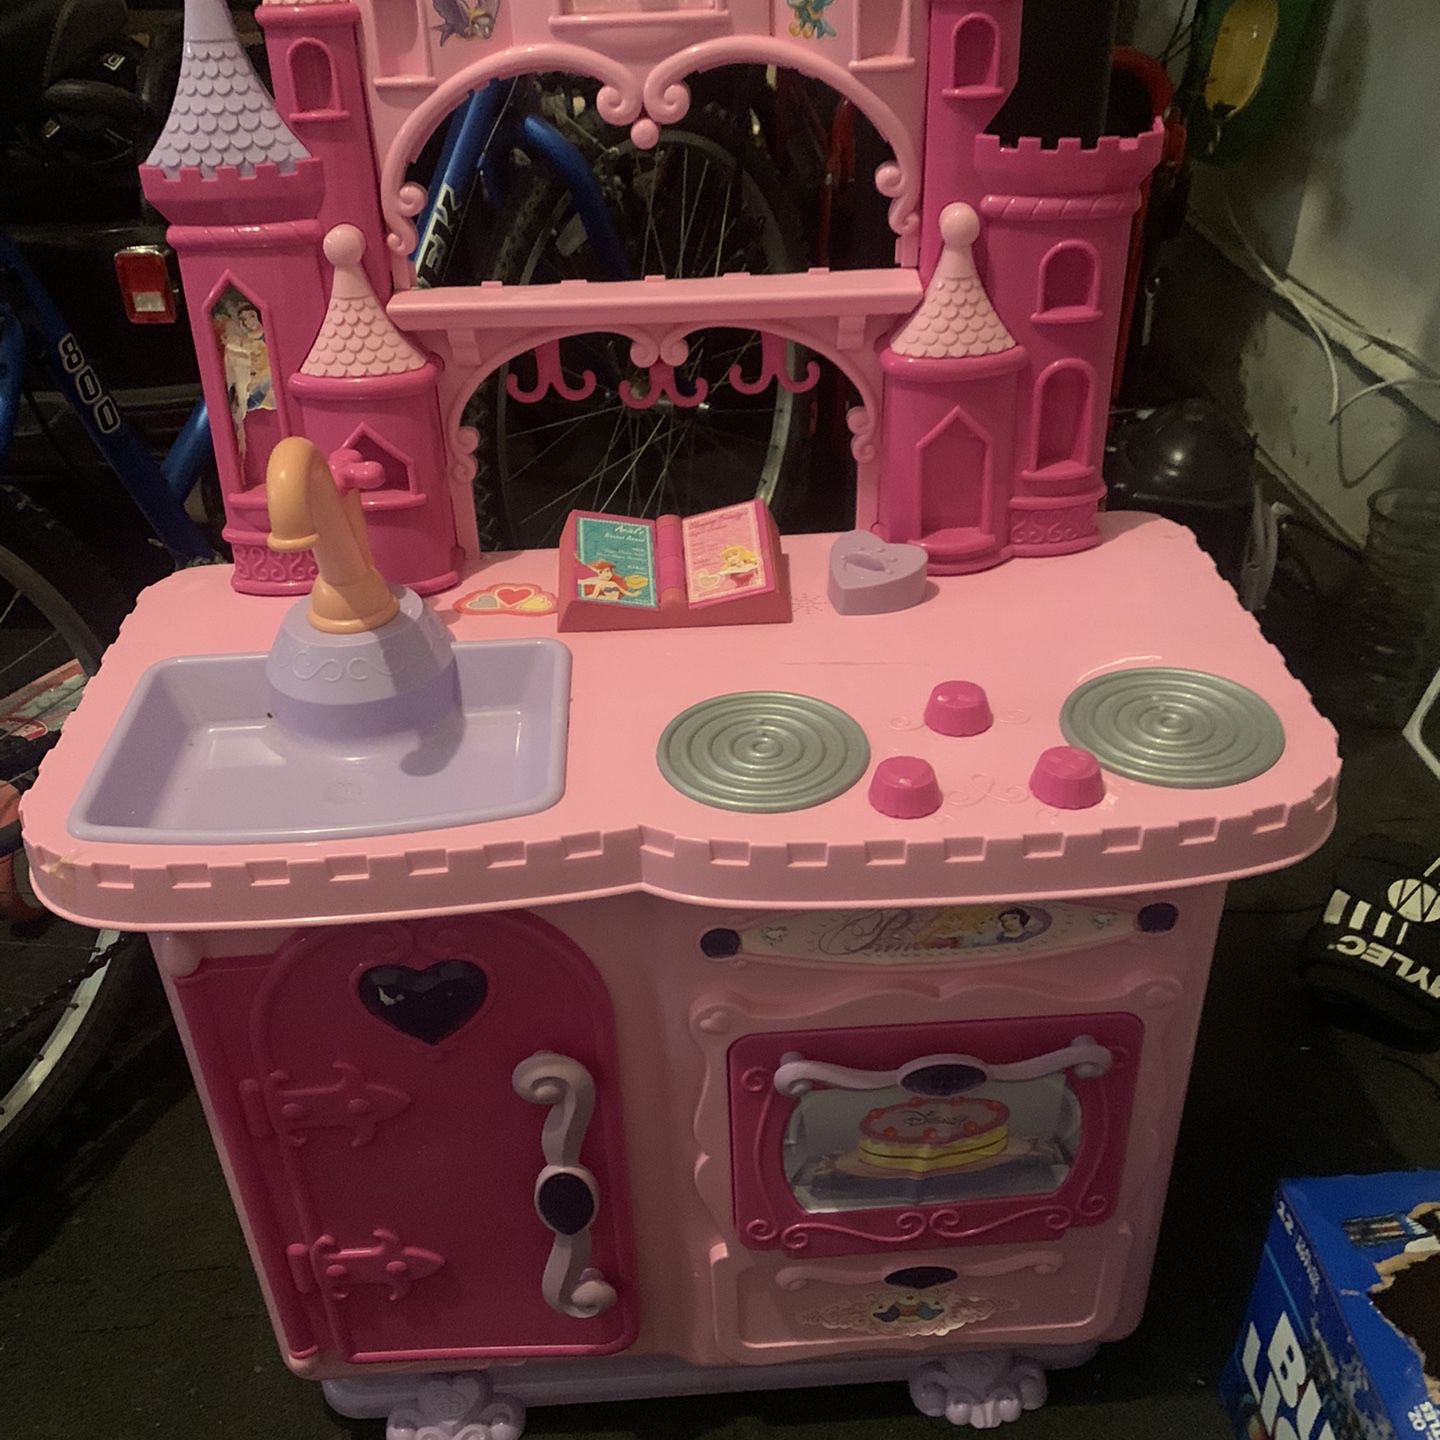 Disney Princess Toy Kitchen for Sale in Plainview, NY - OfferUp